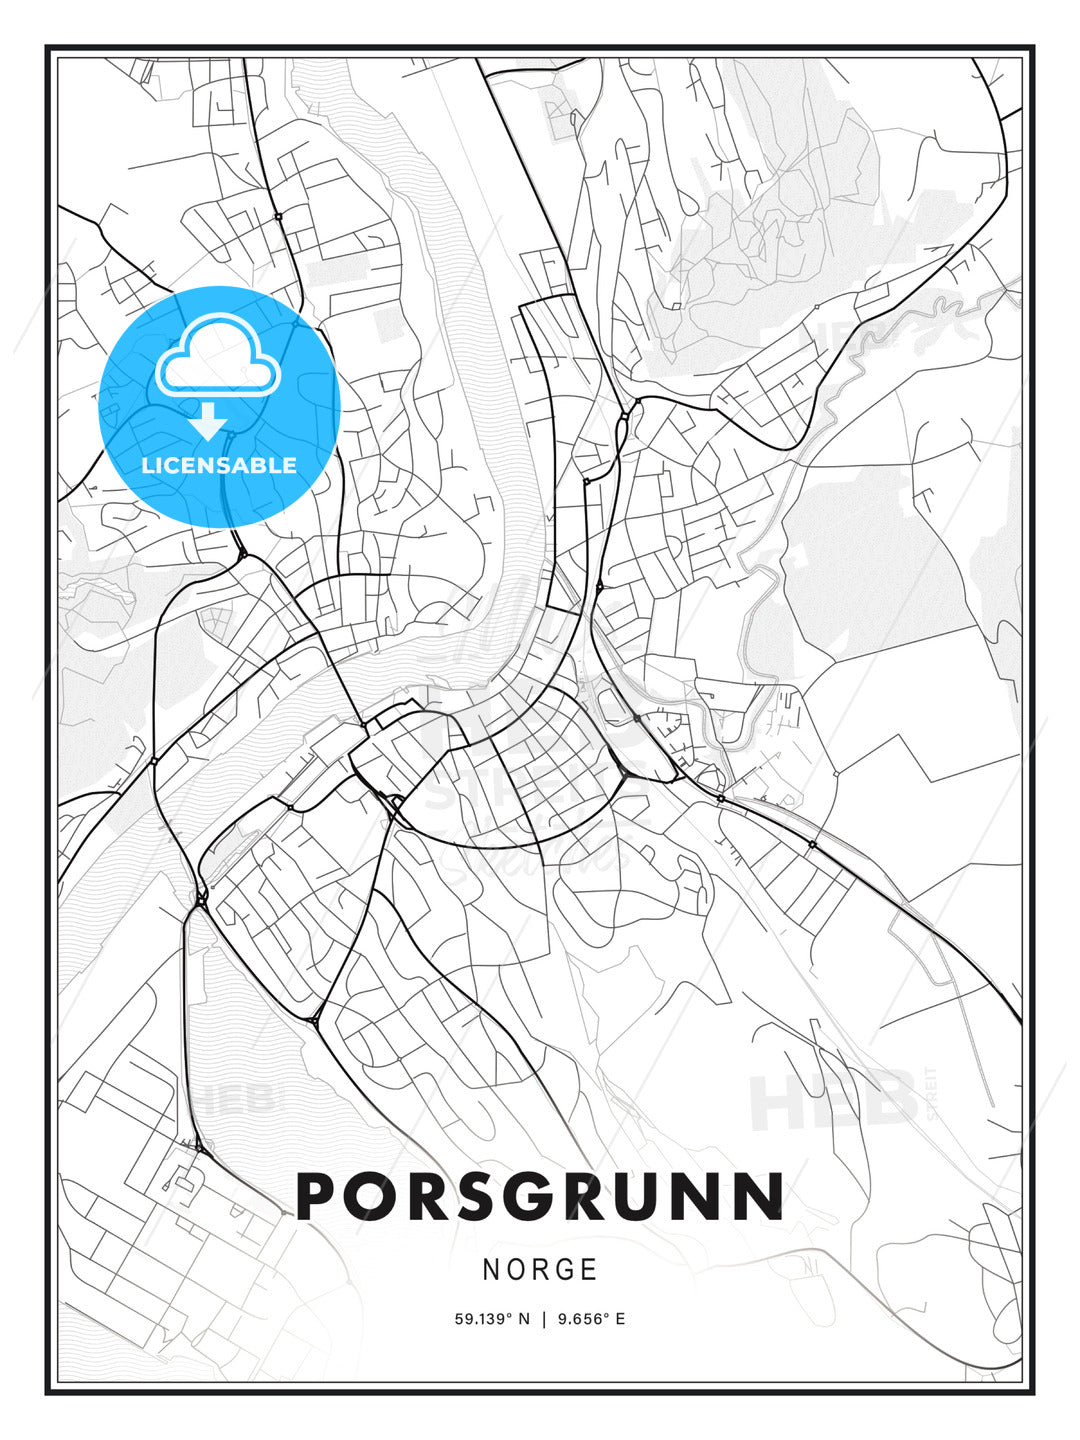 Porsgrunn, Norway, Modern Print Template in Various Formats - HEBSTREITS Sketches